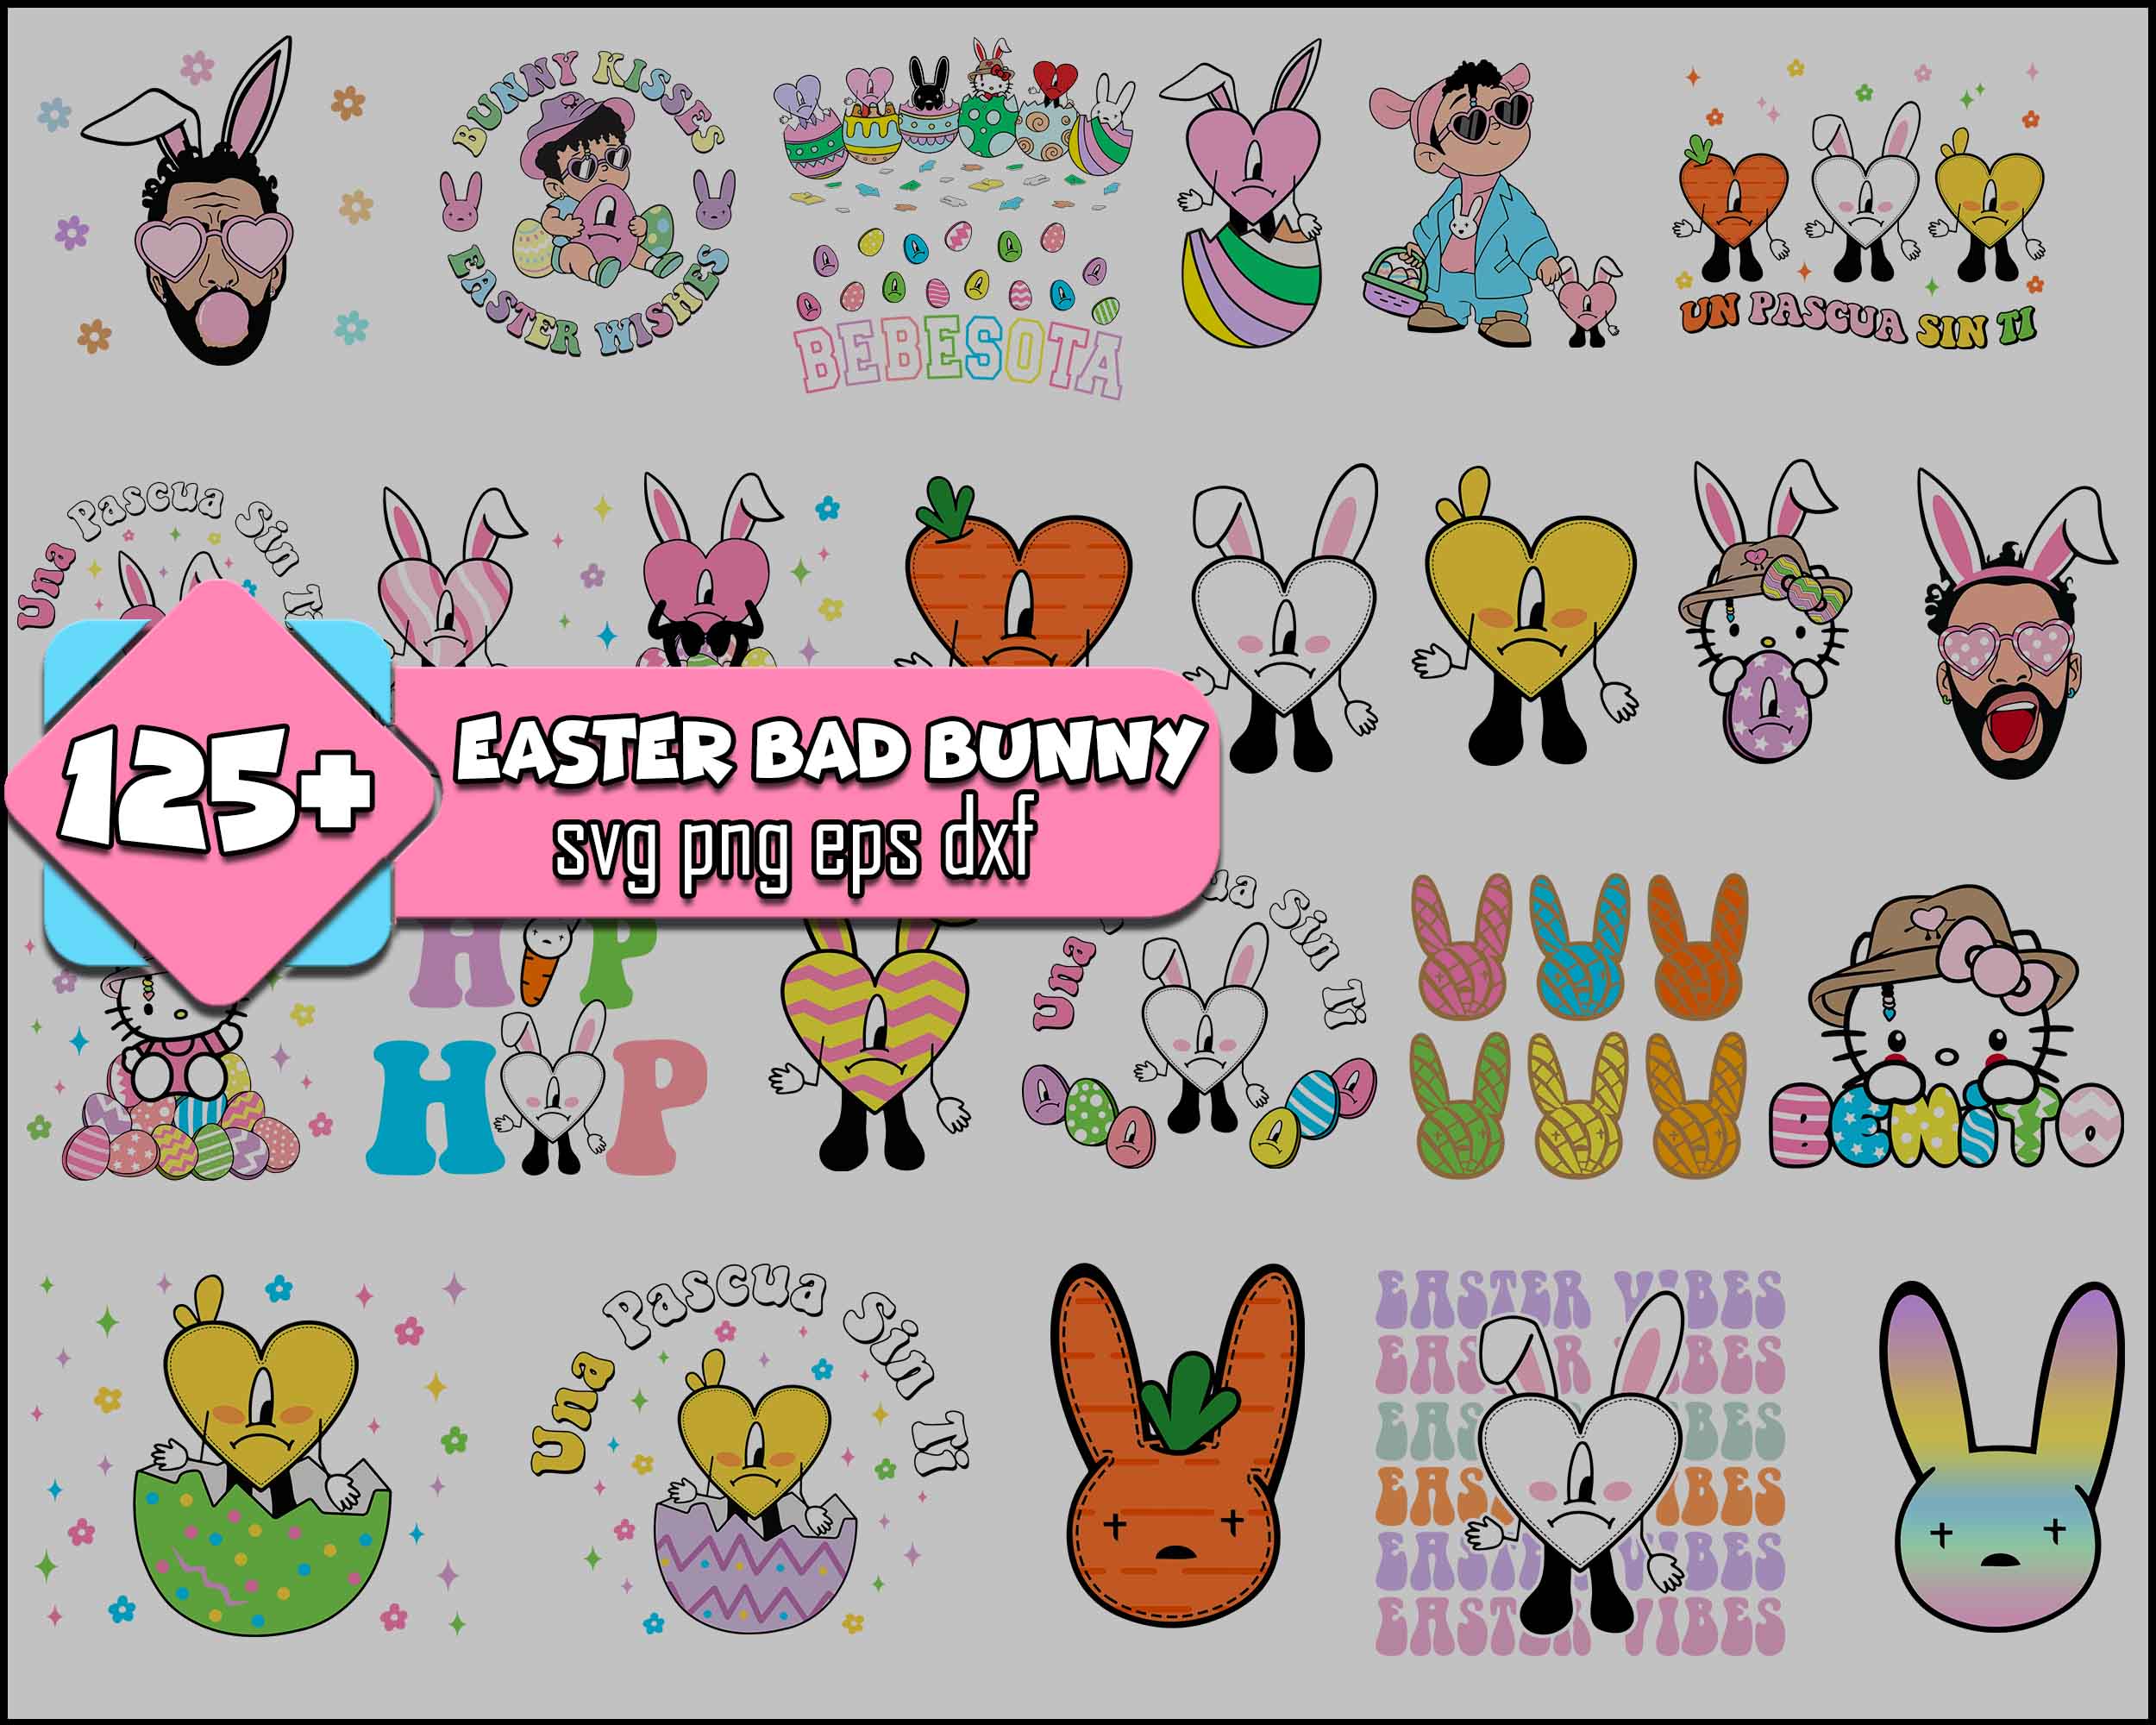 Version 2 - 25+ Easter Day Bad Bunny Png Bundle, Bad Bunny Svg, Easter Png, Easter Benito Png, Un Pascua Sin Ti , Instant Download